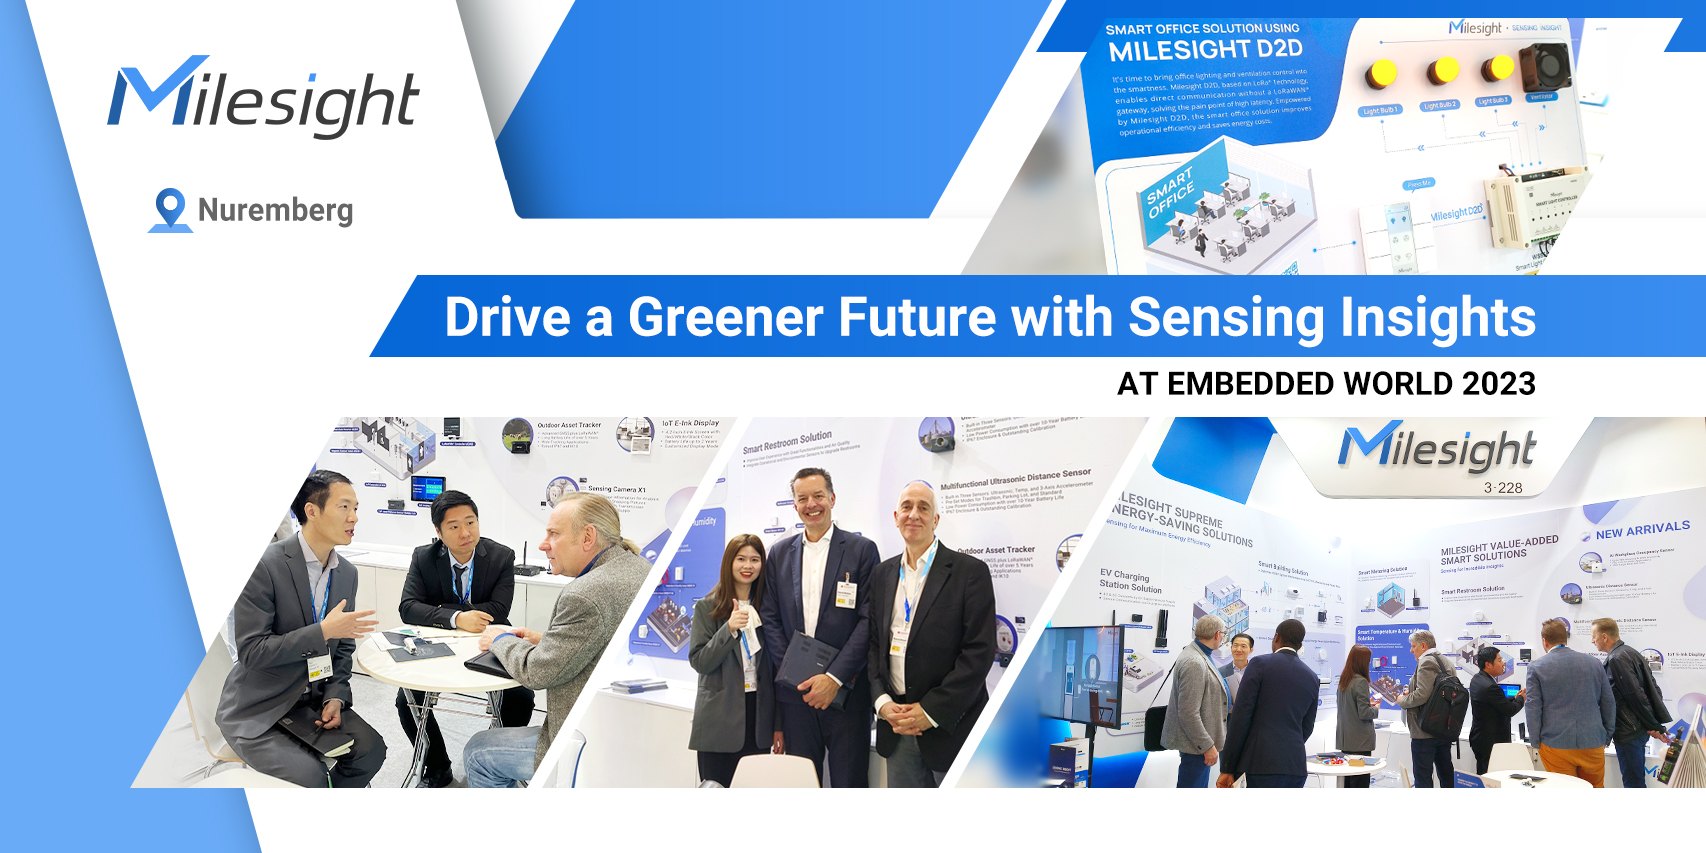 embedded-world-2023-smarter-and-greener-future